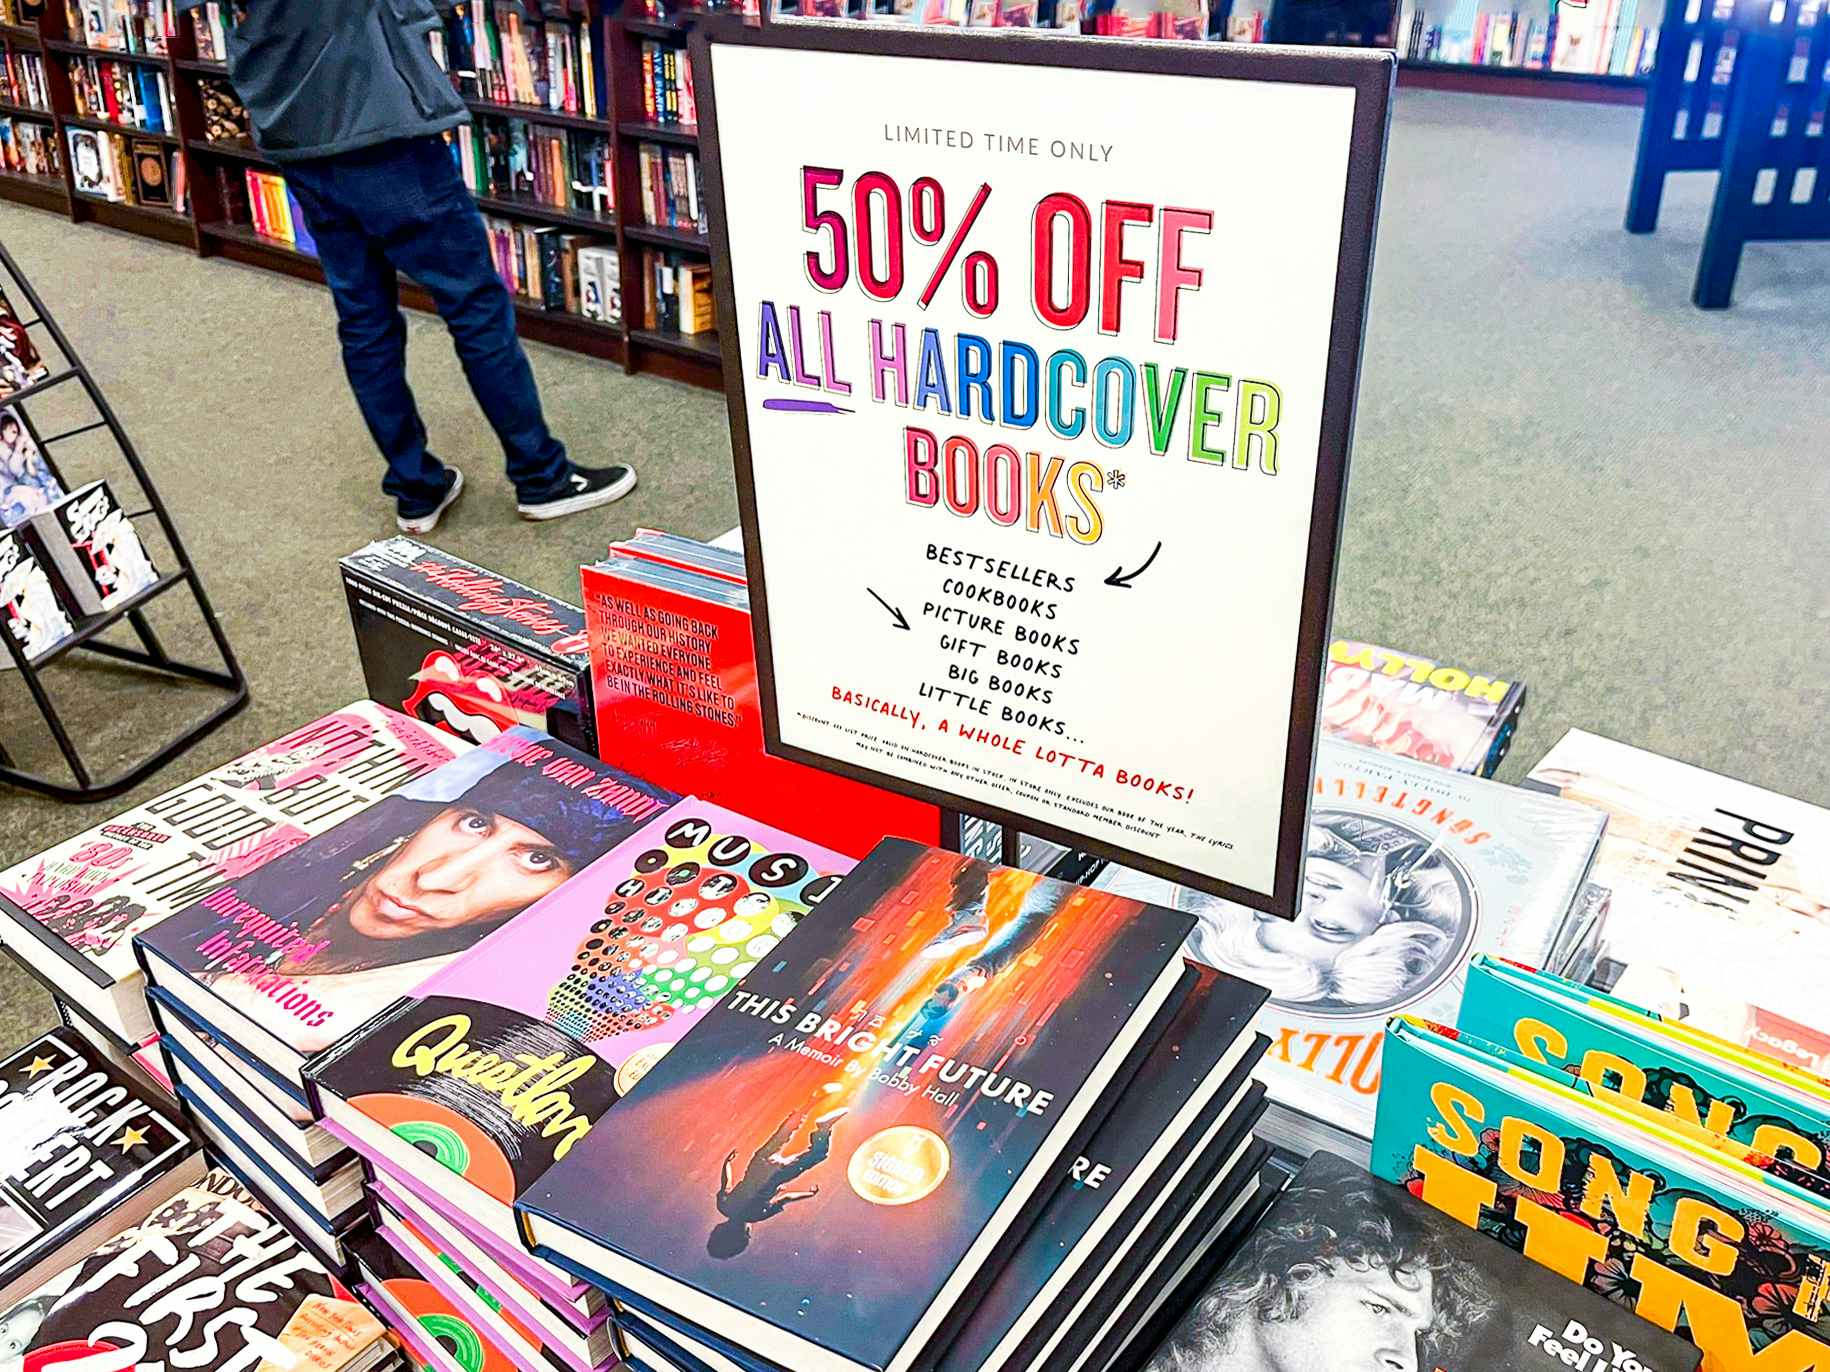 A book display with a sign that reads, "Limited Time Only, 50% off all hardcover books" at Barnes & Noble 